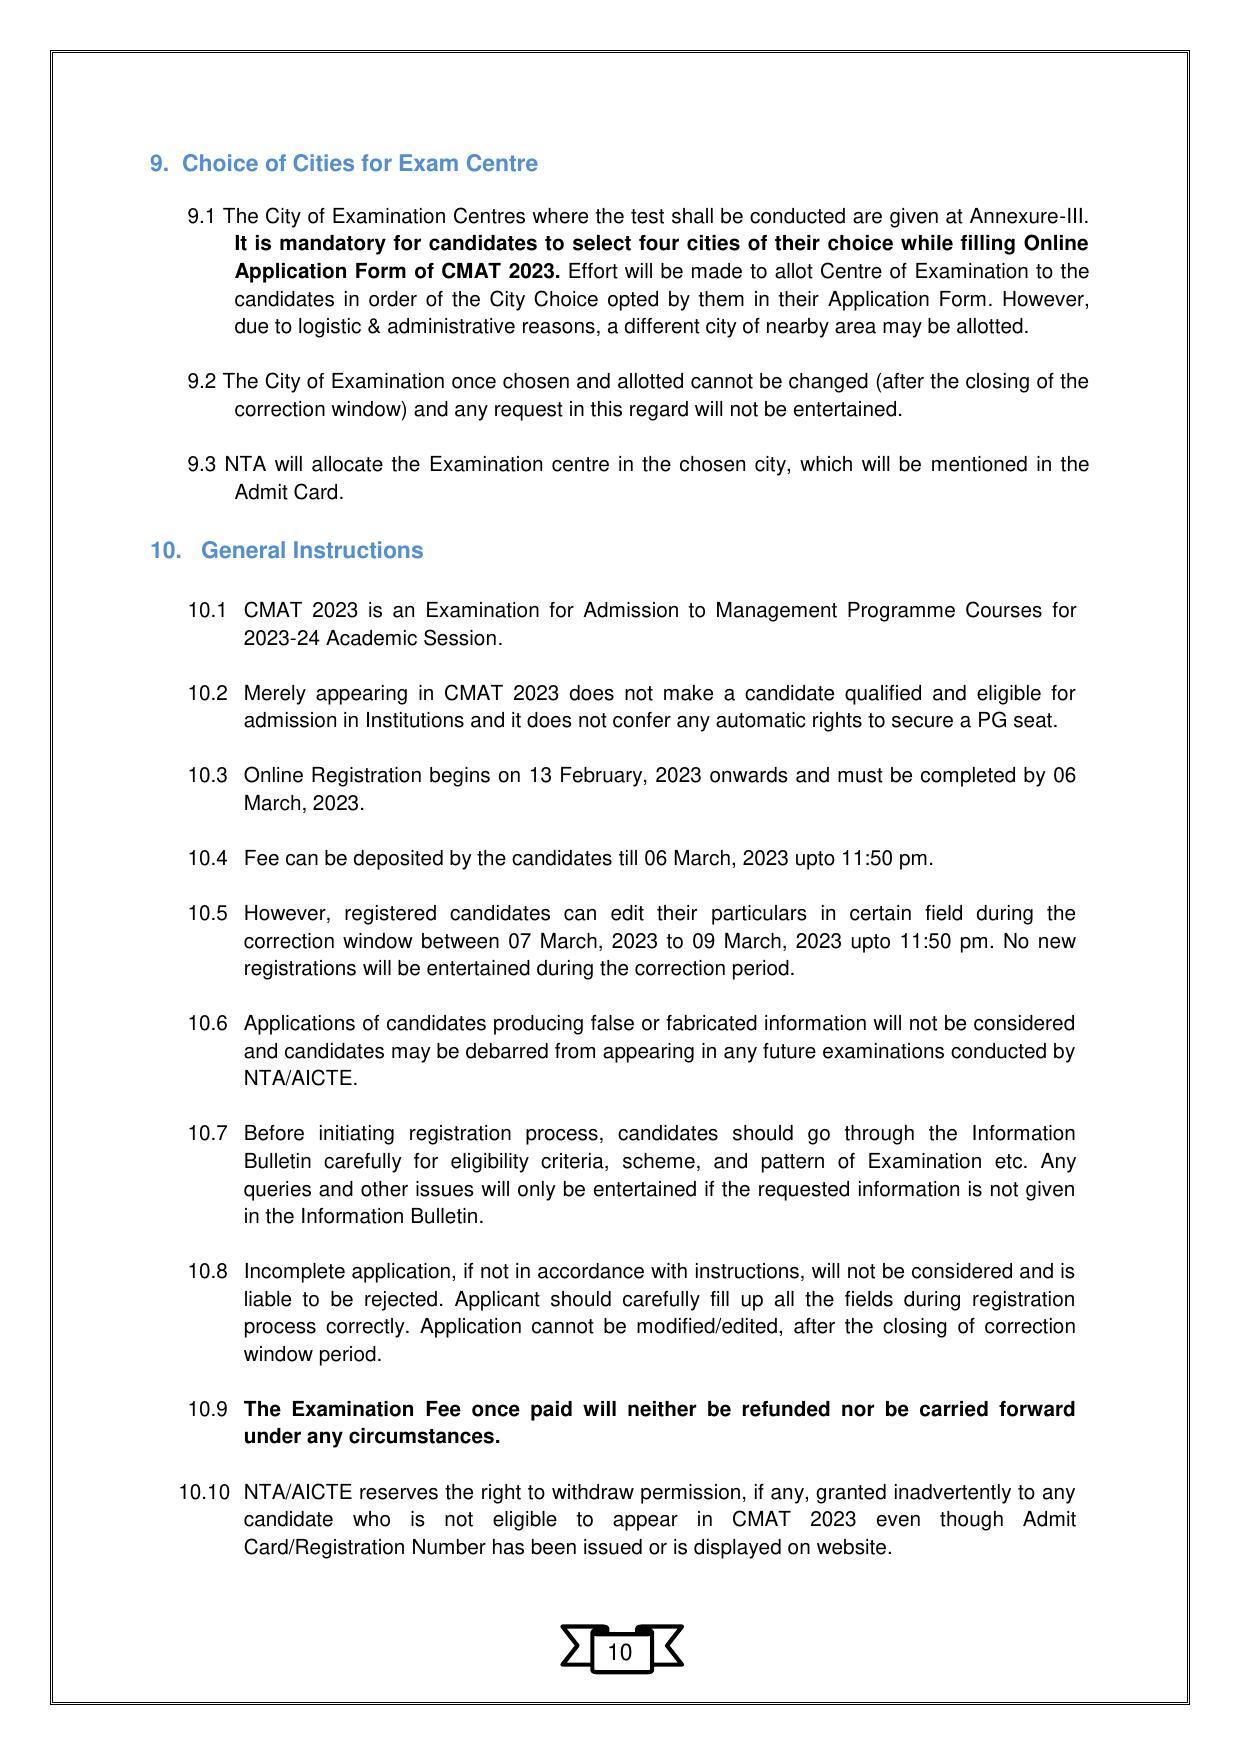 CMAT 2023 Information Bulletin - Page 13